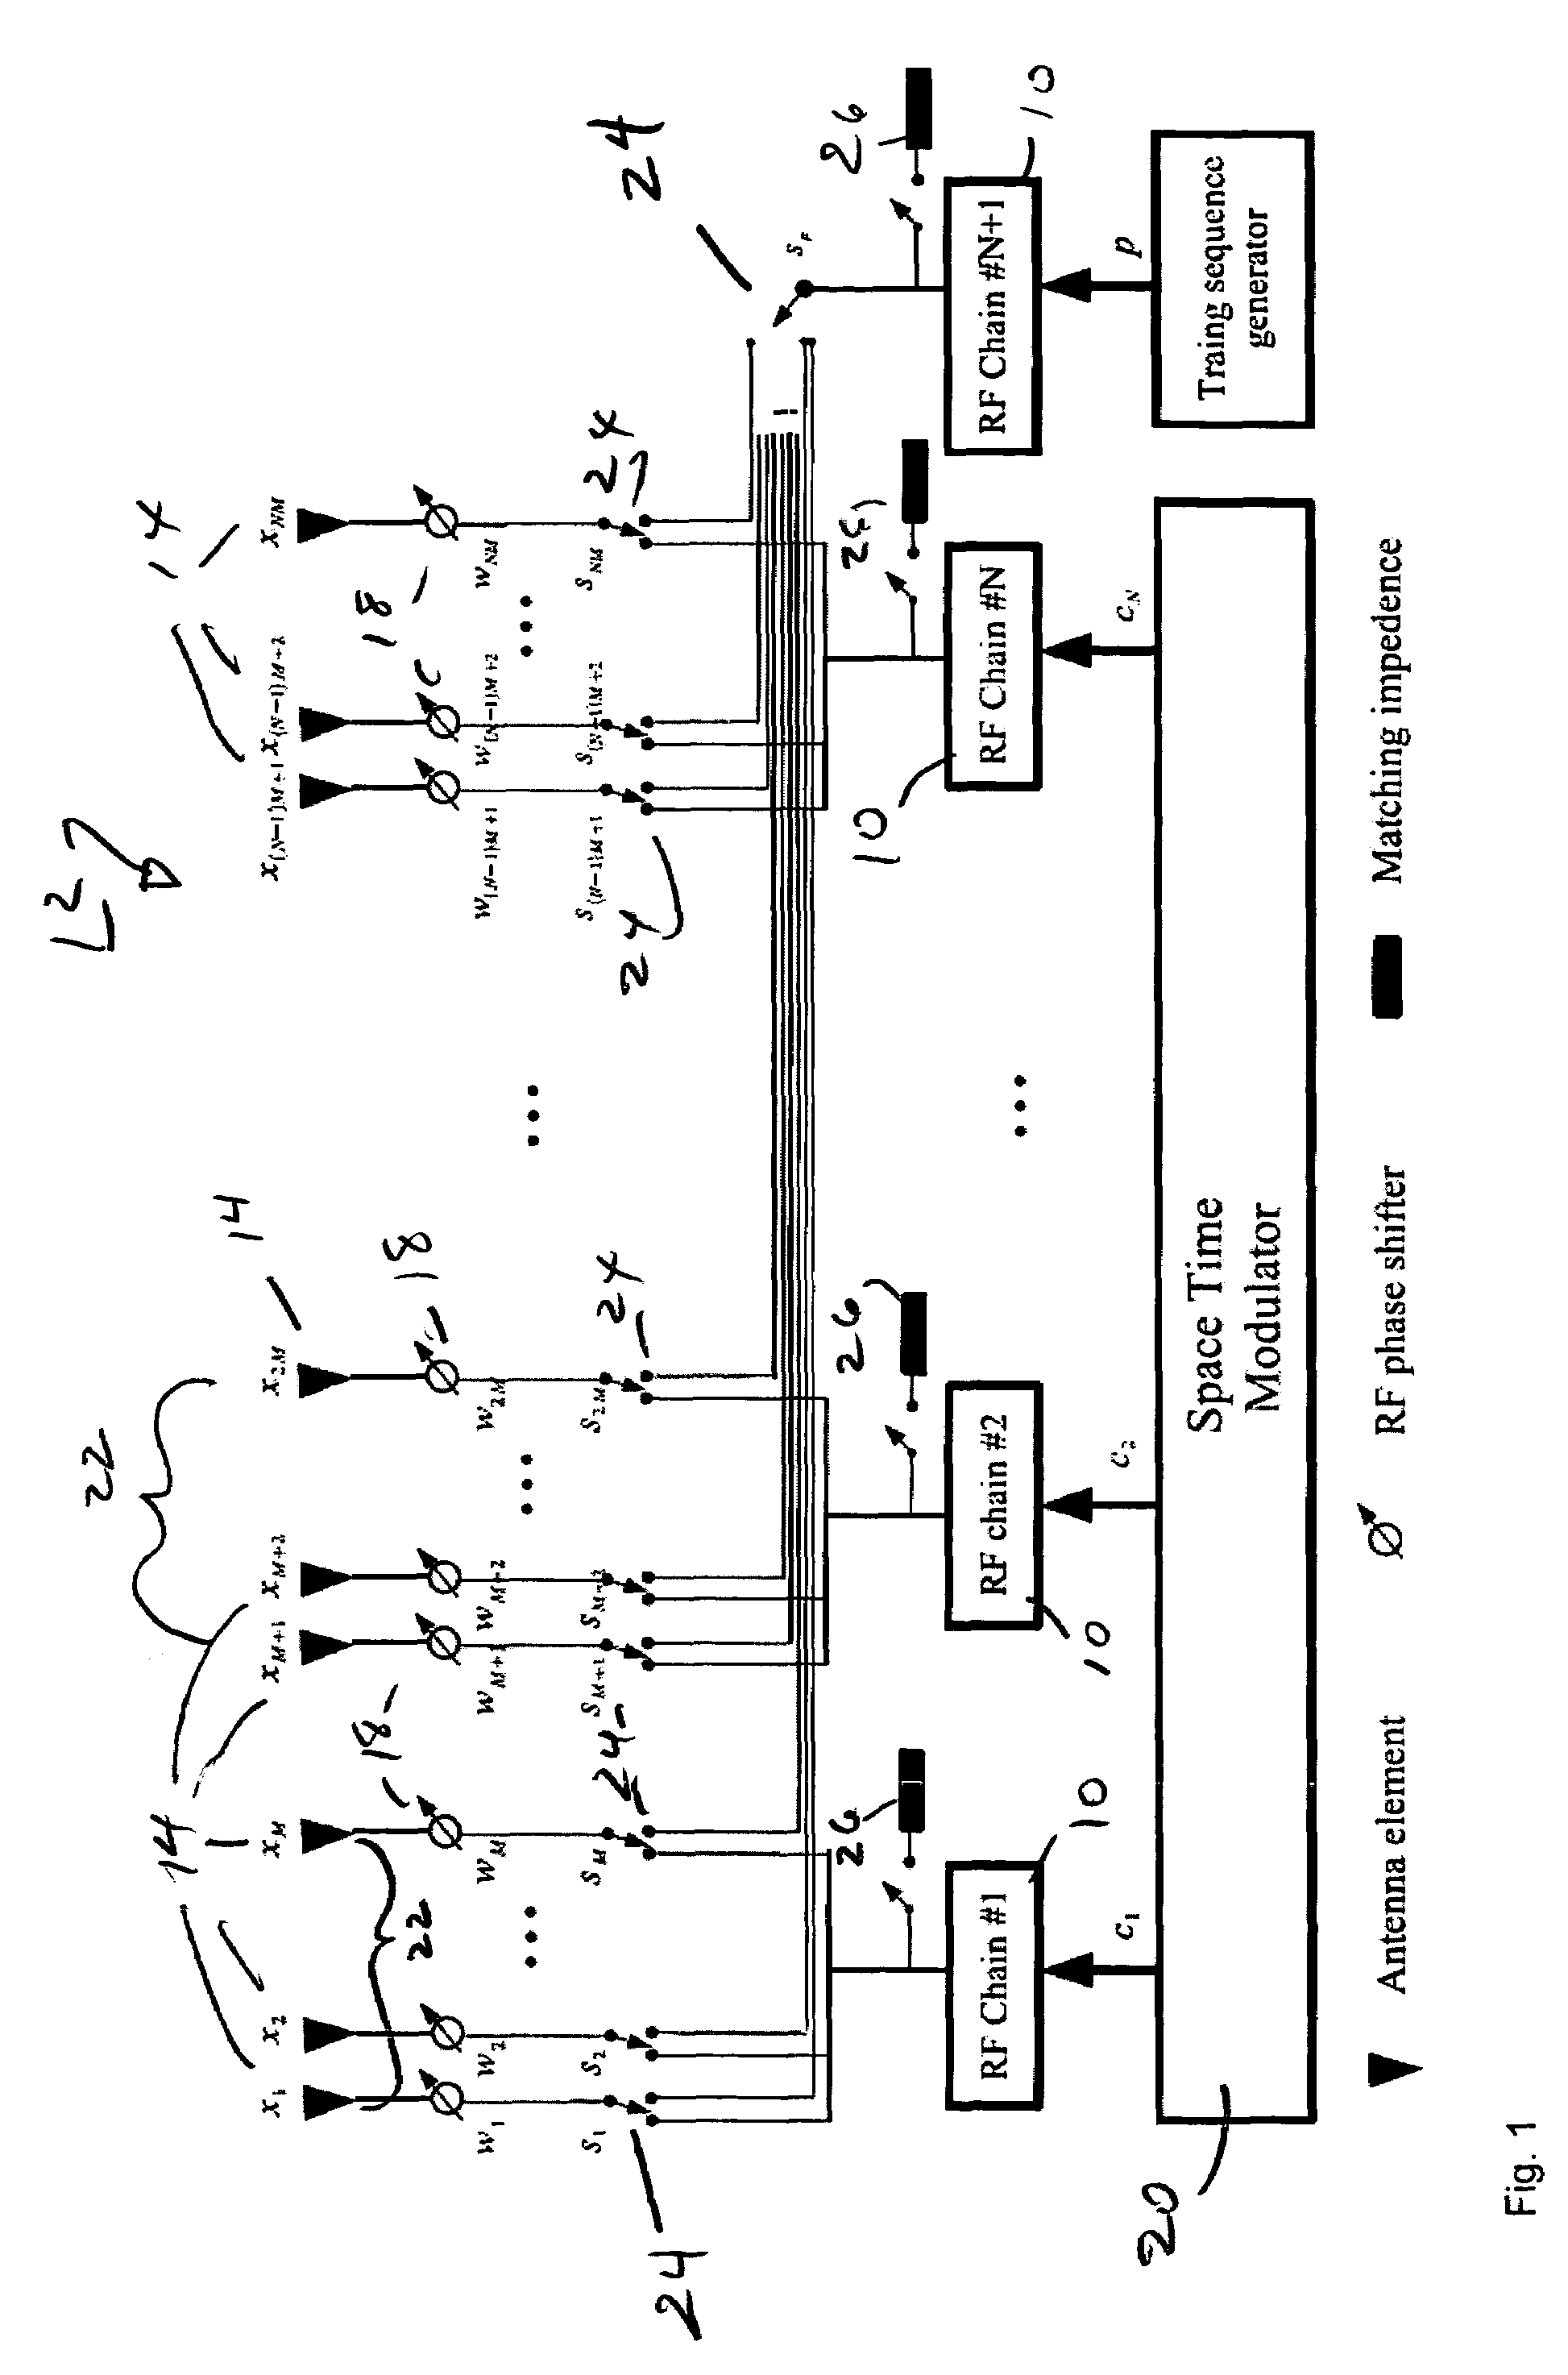 Apparatus and method for a system architecture for multiple antenna wireless communication systems using round robin channel estimation and transmit beam forming algorithms